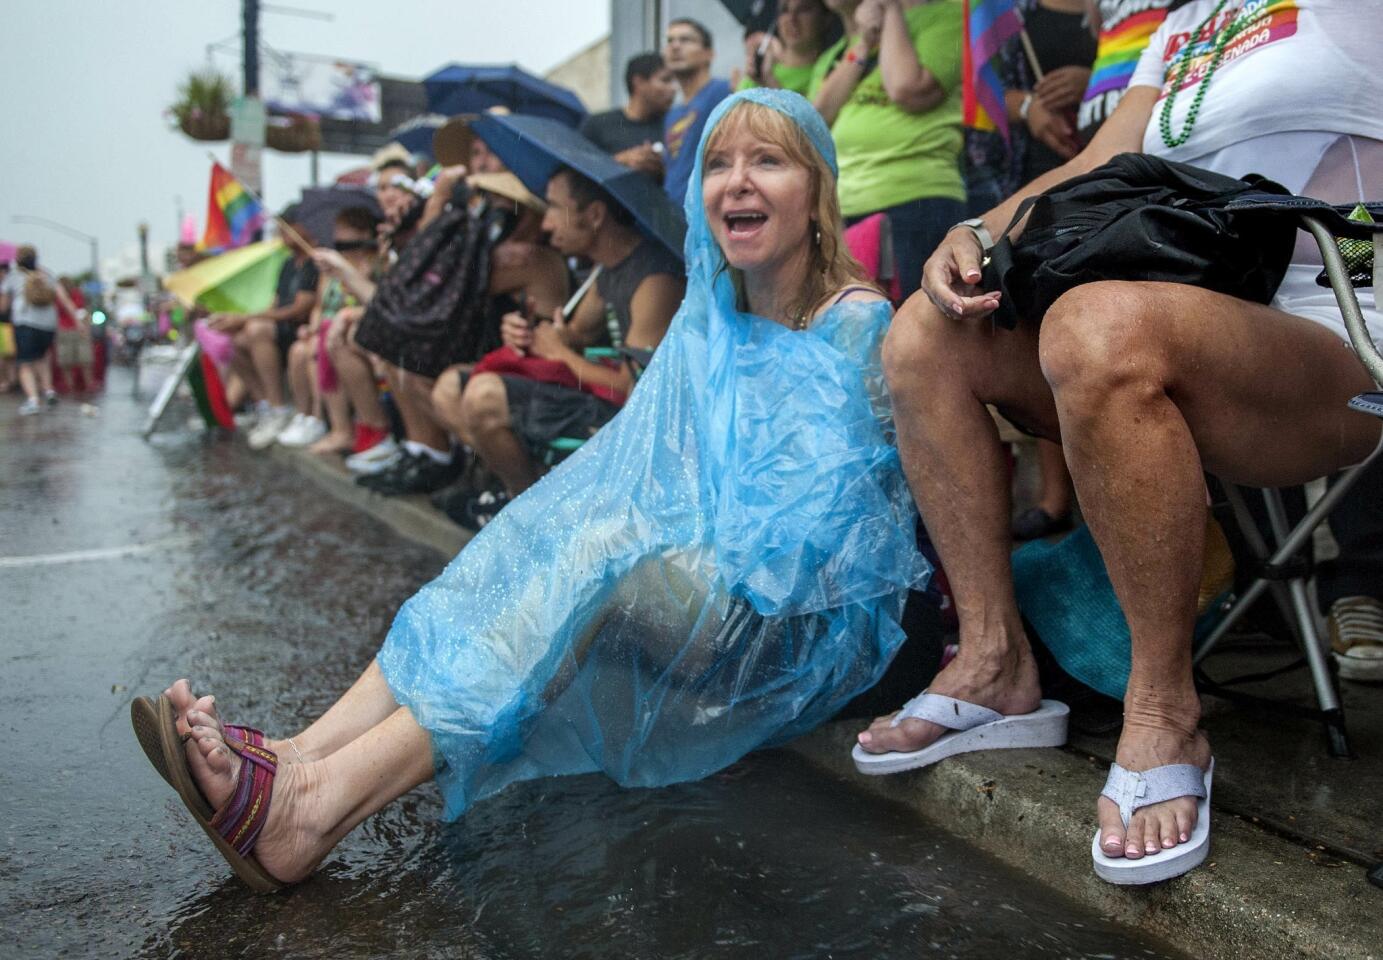 Jennifer Roth wears a poncho as she sits above the flowing storm drains watching the San Diego Pride Parade.